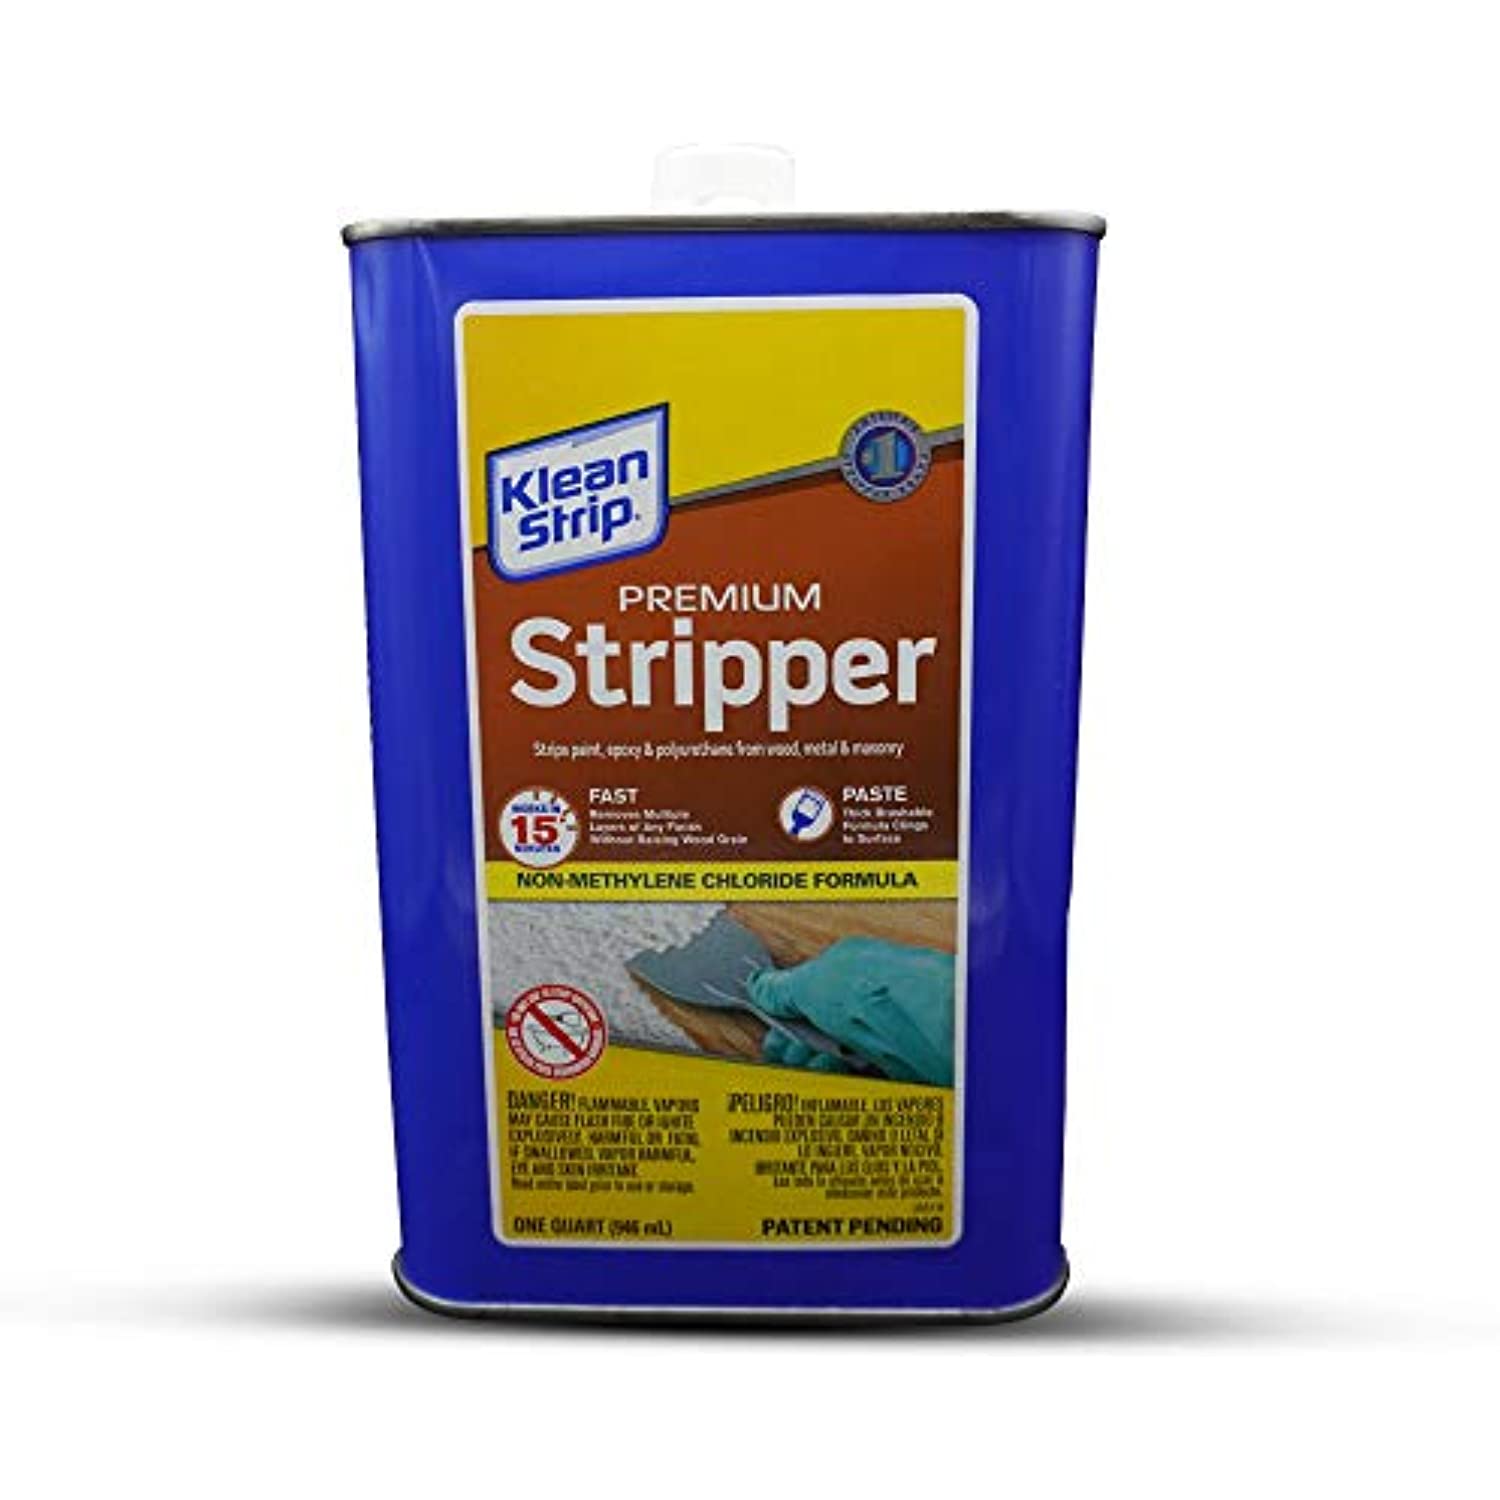 Klean Strip Premium Stripper Non-Methylene Chloride Formula Fast-Acting Liquid Works 15-mins Removes Multiple Layers of Latex and Oil-Based Paint Now Comes with Putty Knife by Centaurus AZ 1 Quart